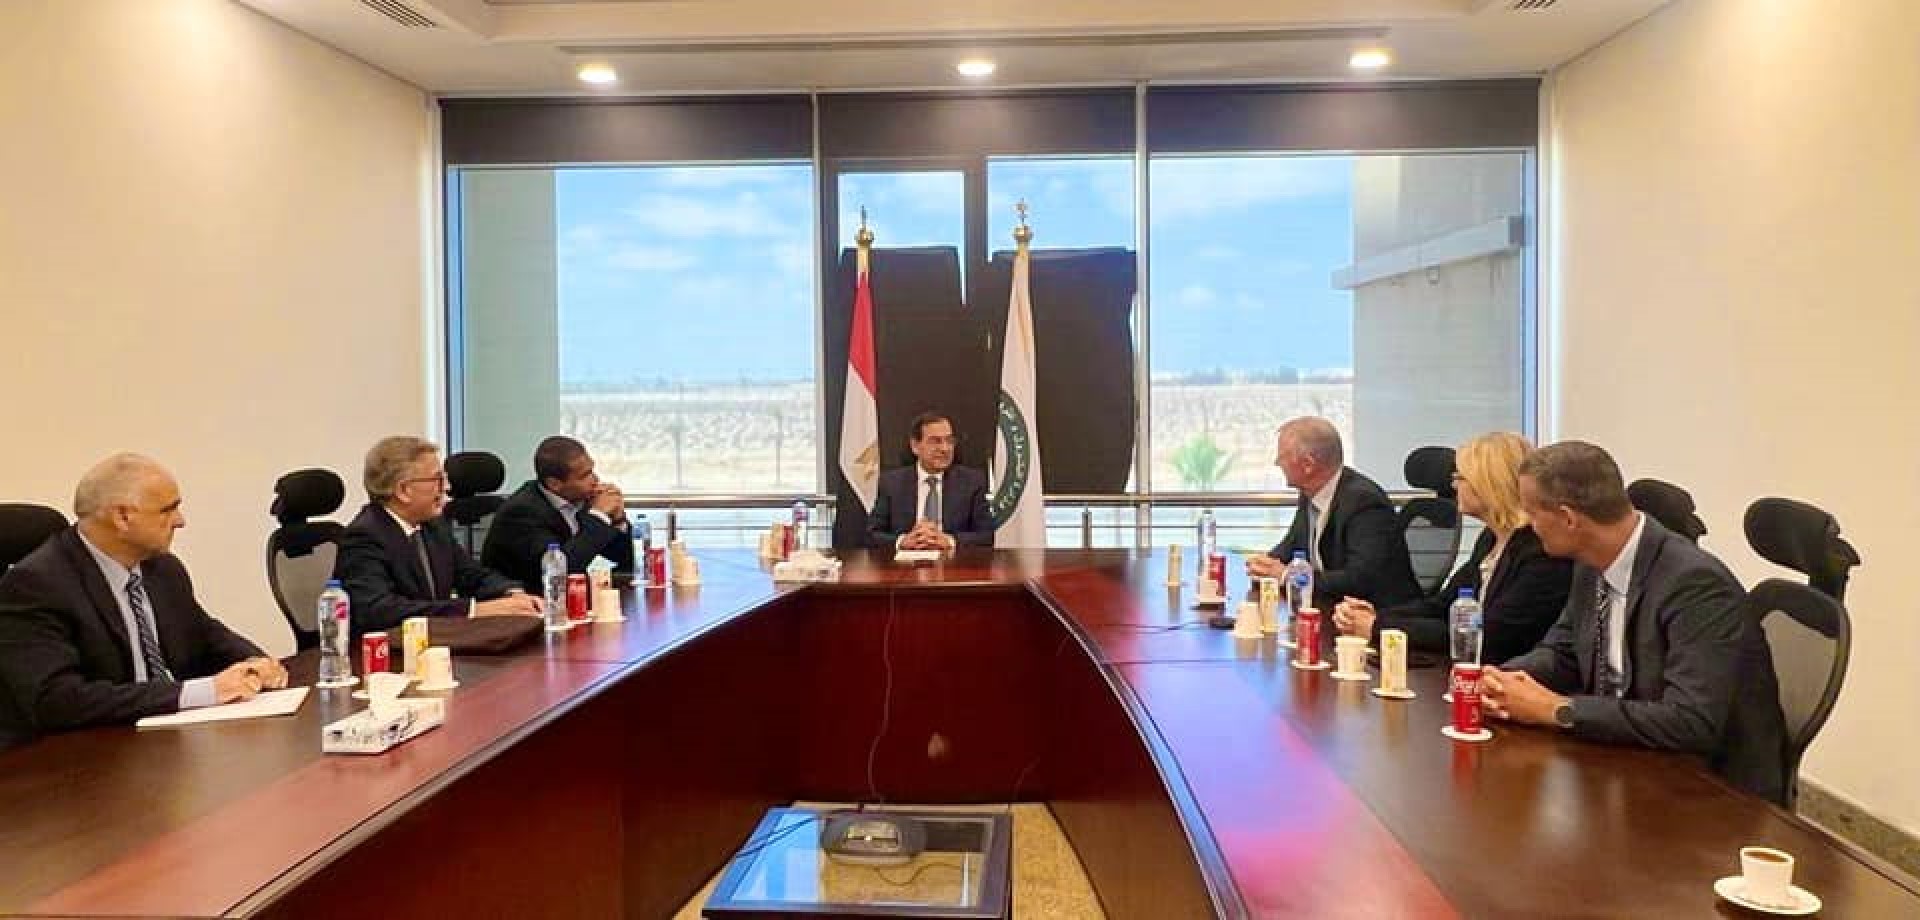 Joint discussions between the Minister of Petroleum and Mineral Resources and the President of the Danish company Halder Topso in the areas of energy transformation